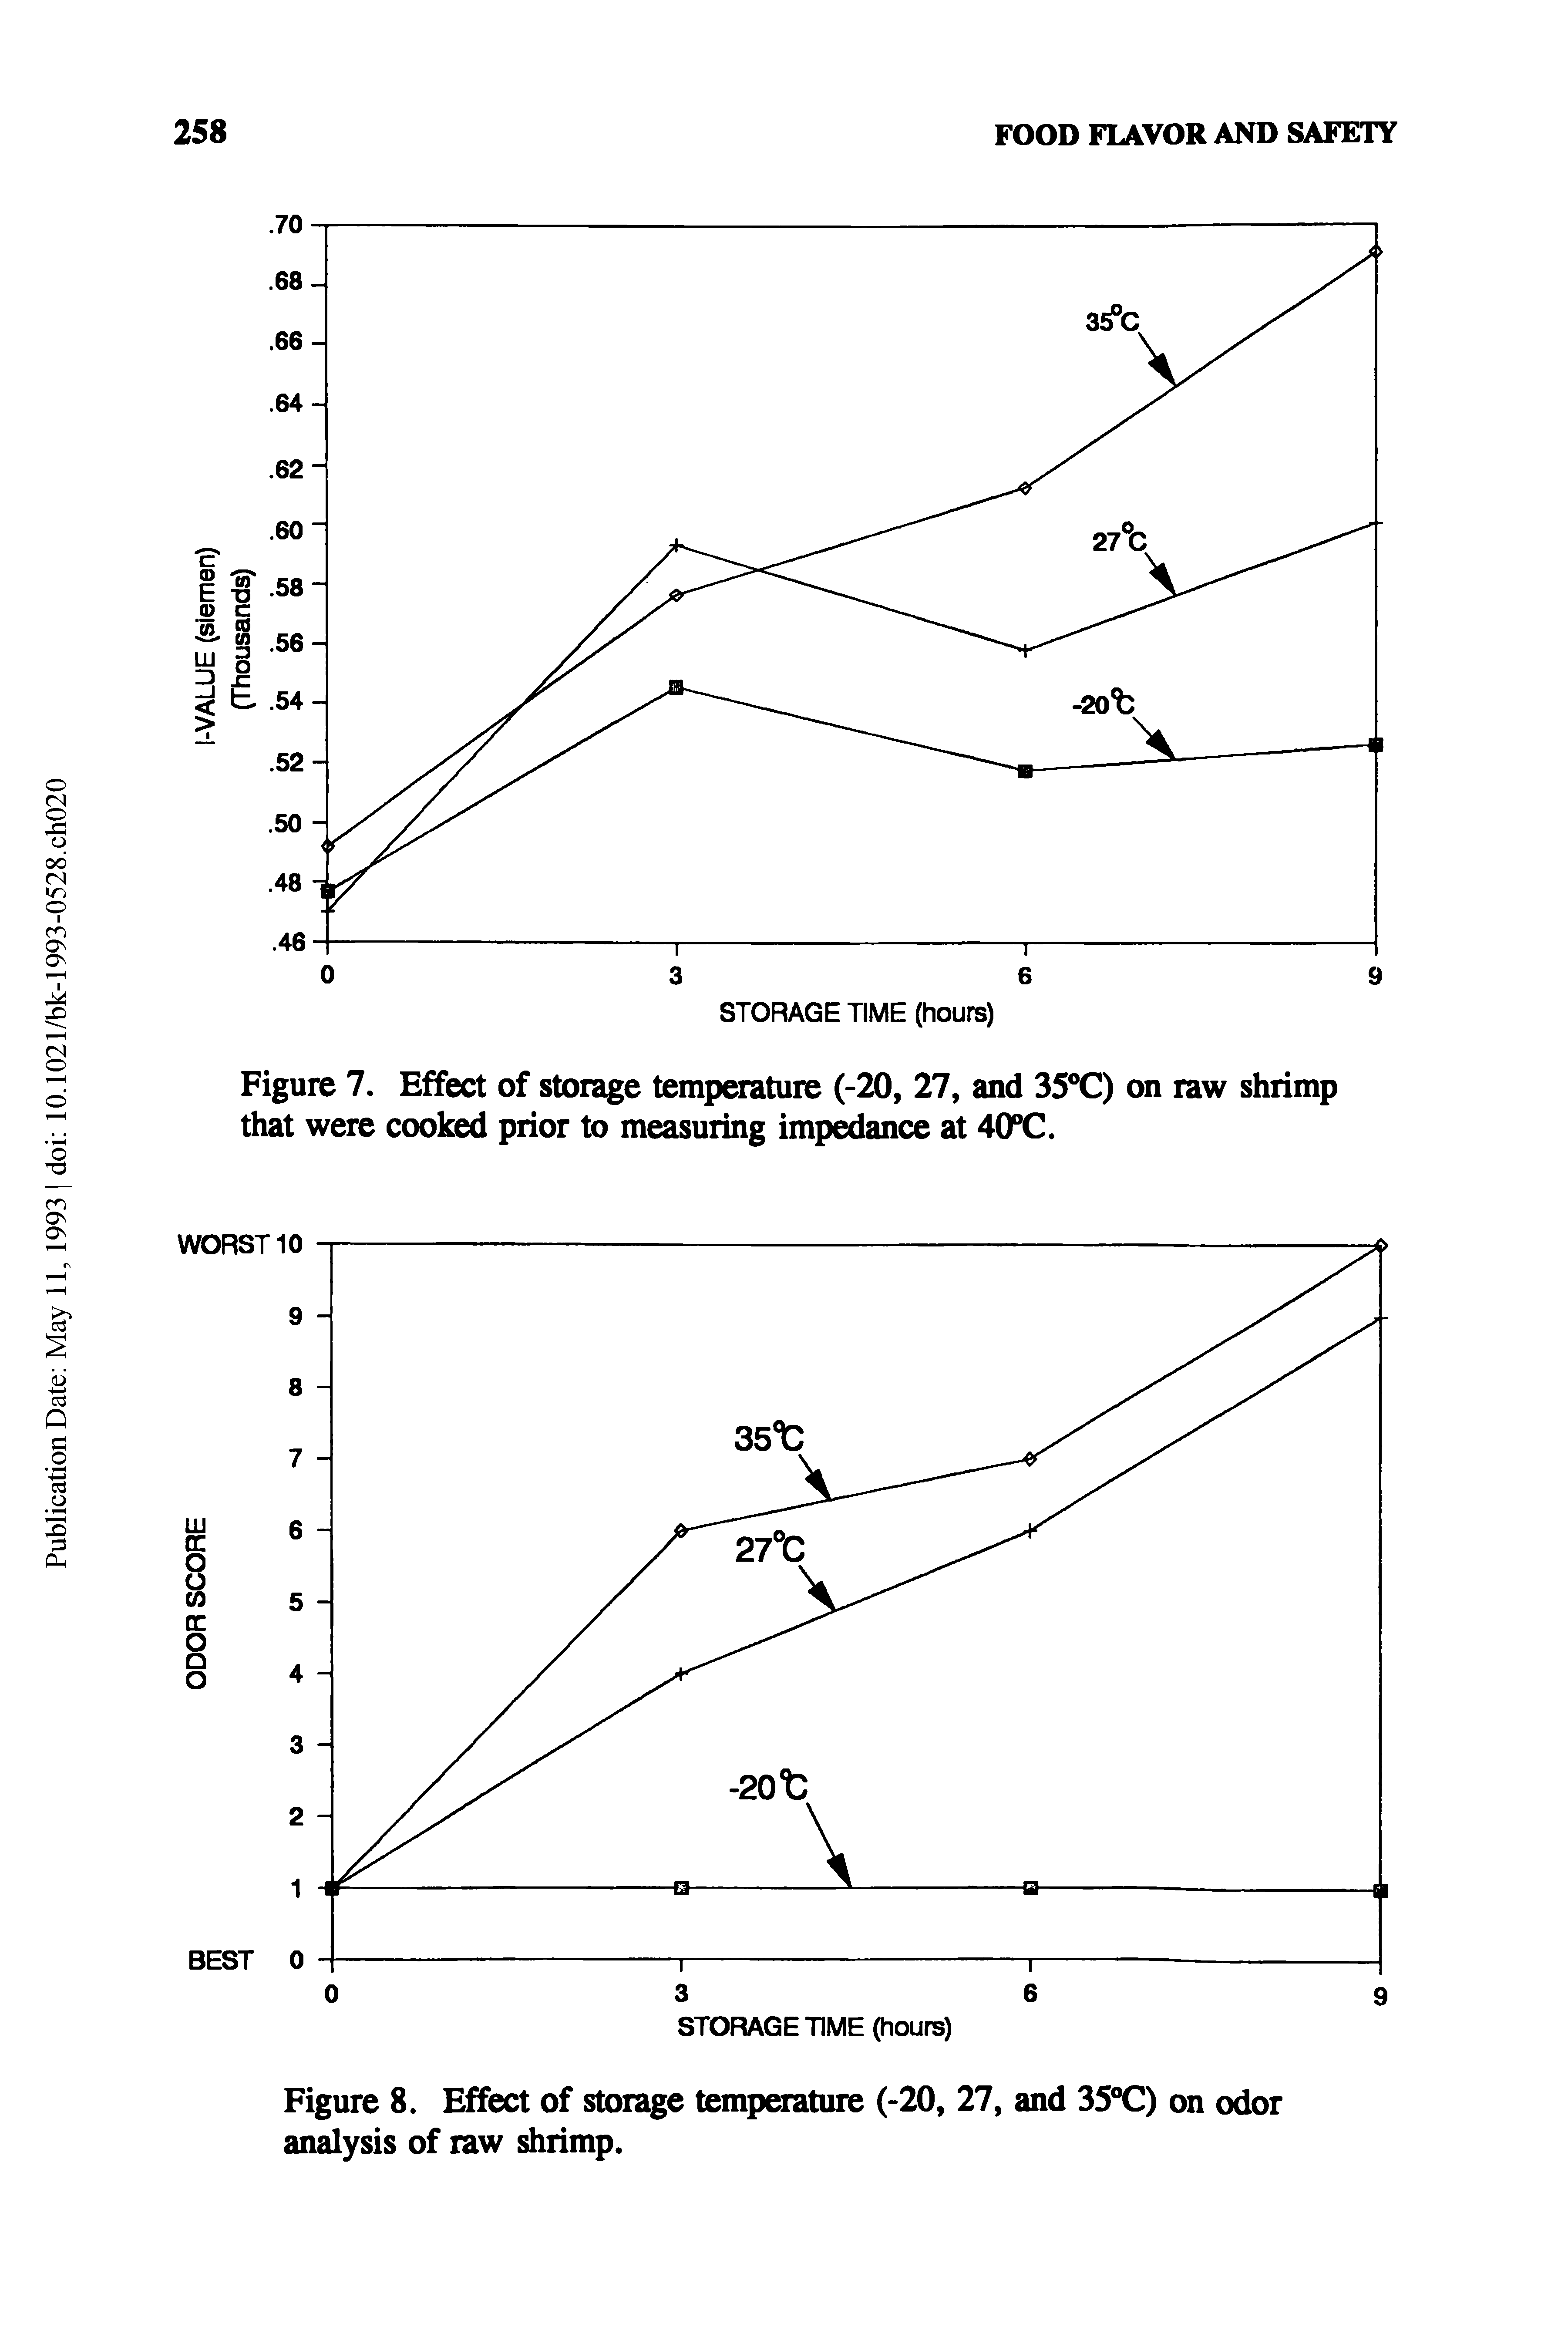 Figure 7. Effect of storage temperature (-20, 27, and 35 C) on raw shrimp that were cooked prior to measuring imp ance at 40 C.